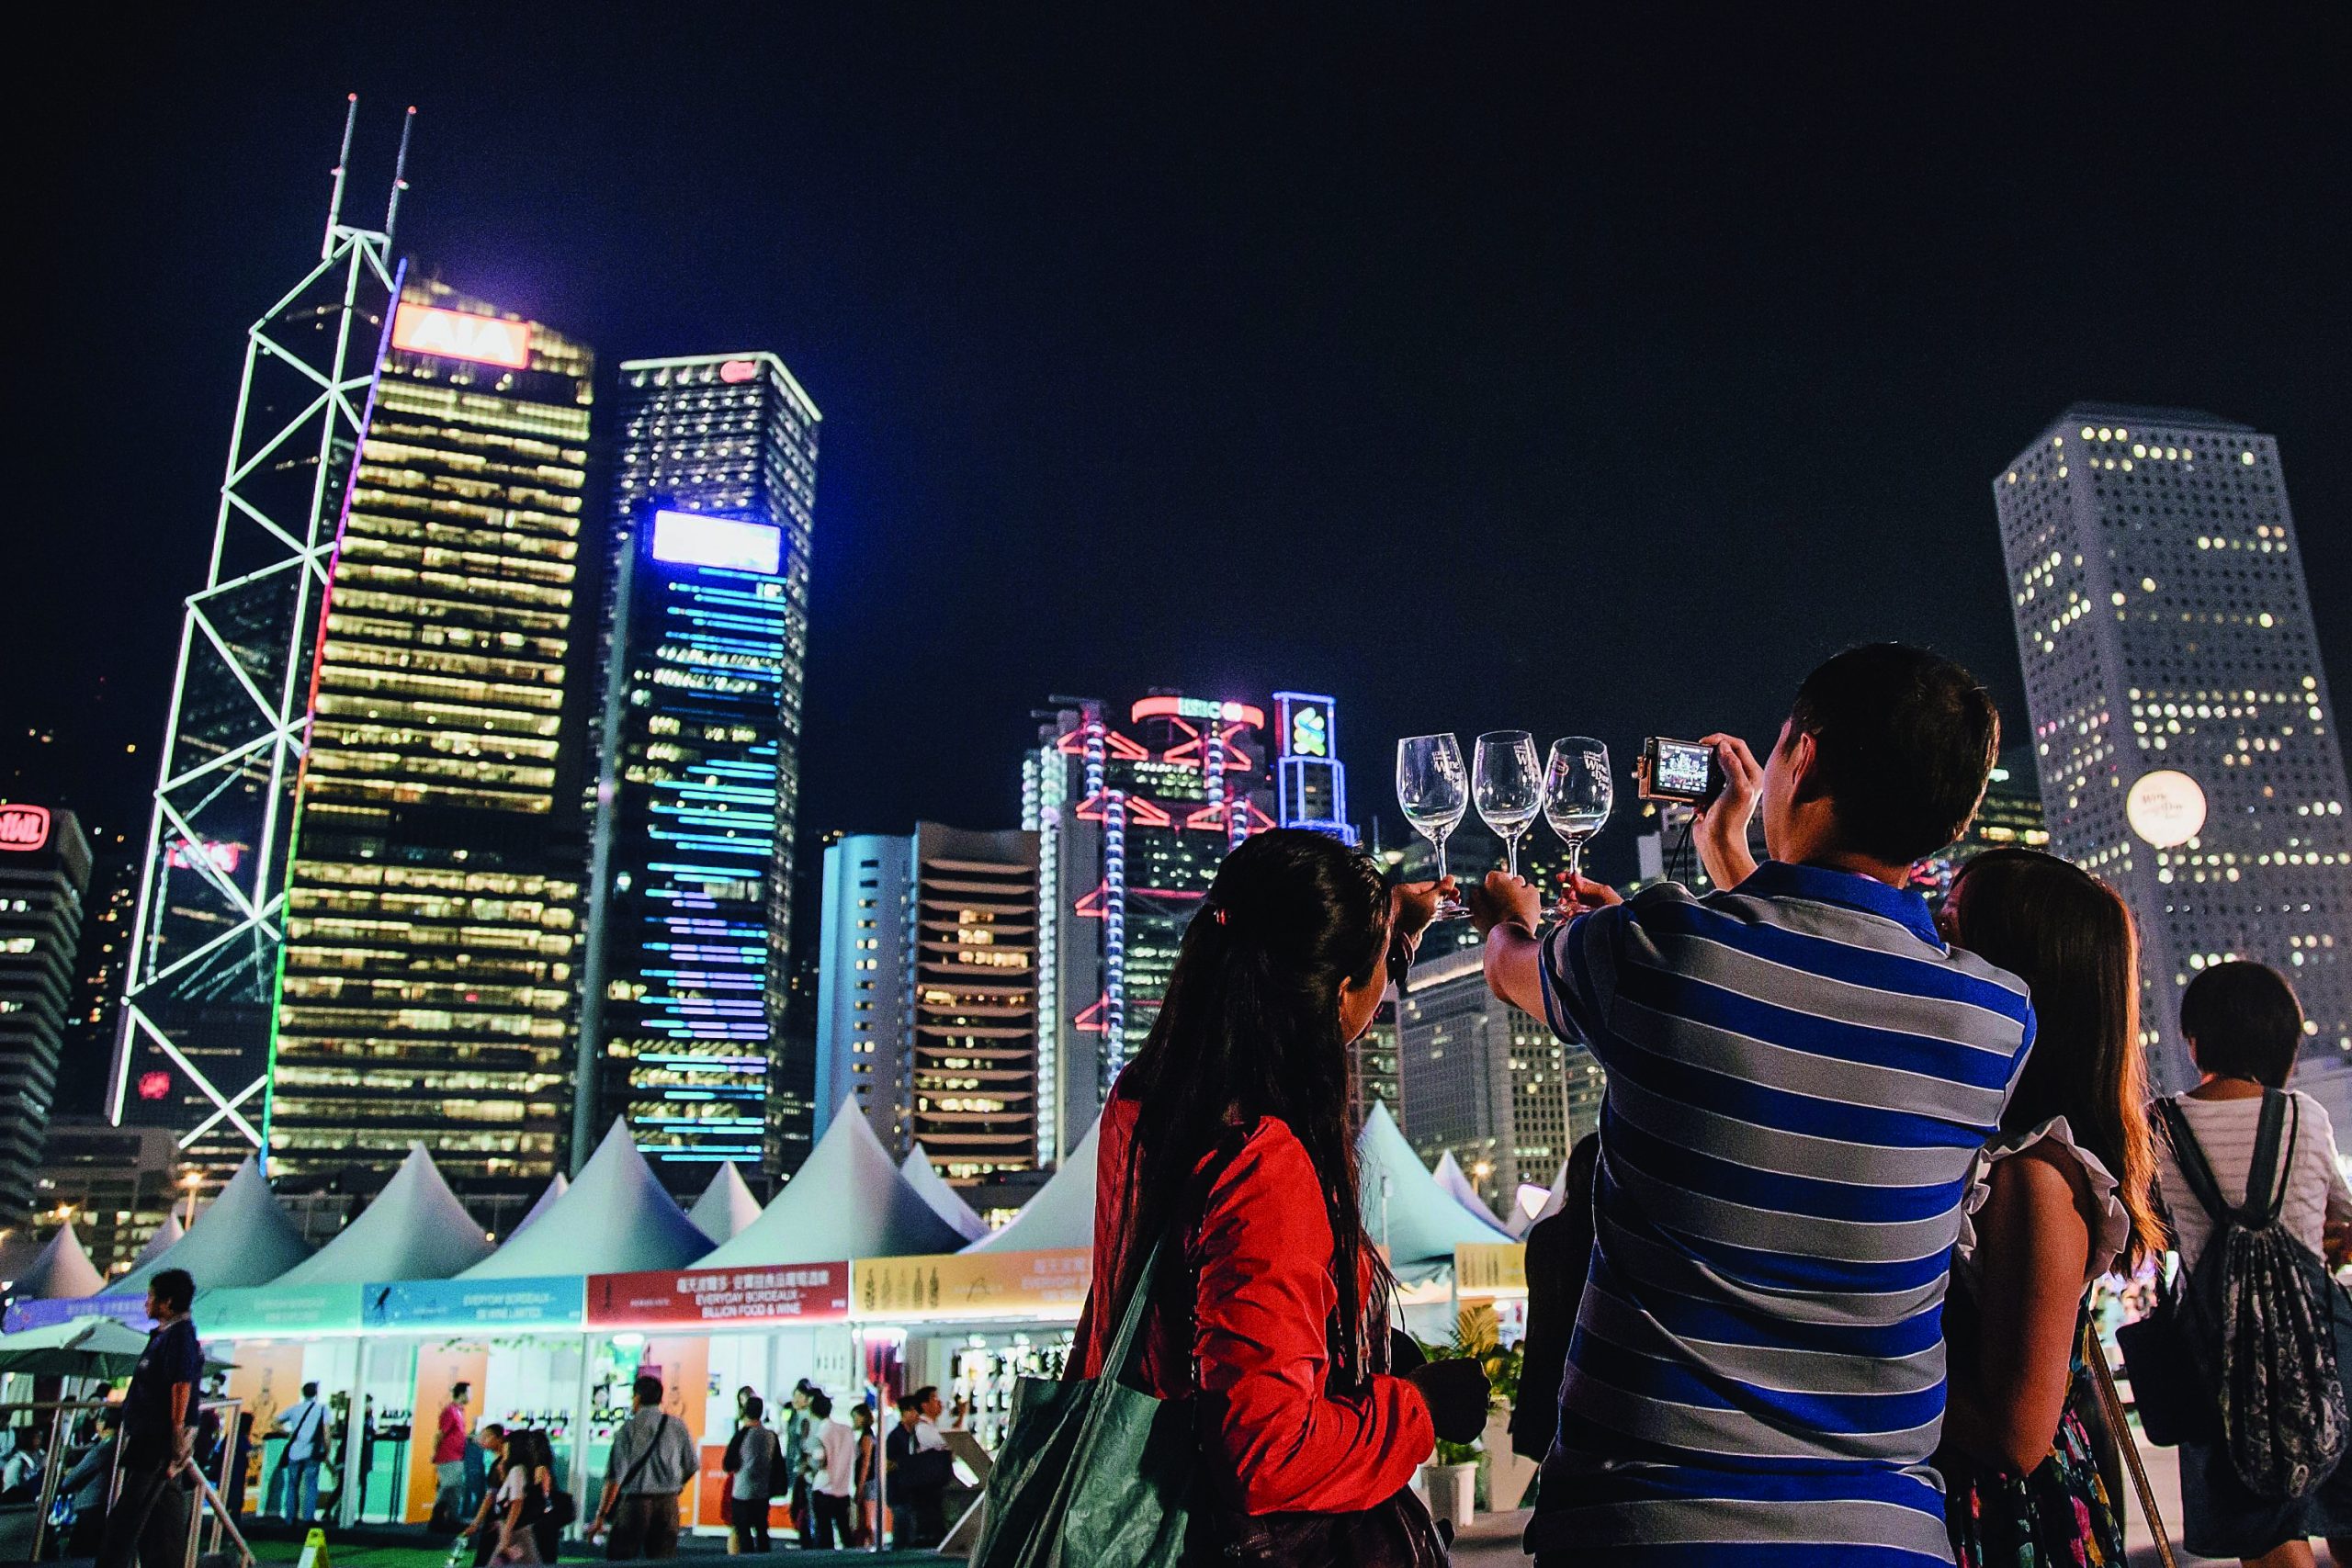 Hong Kong most popular festivals and events HKTB Wine Dine scaled